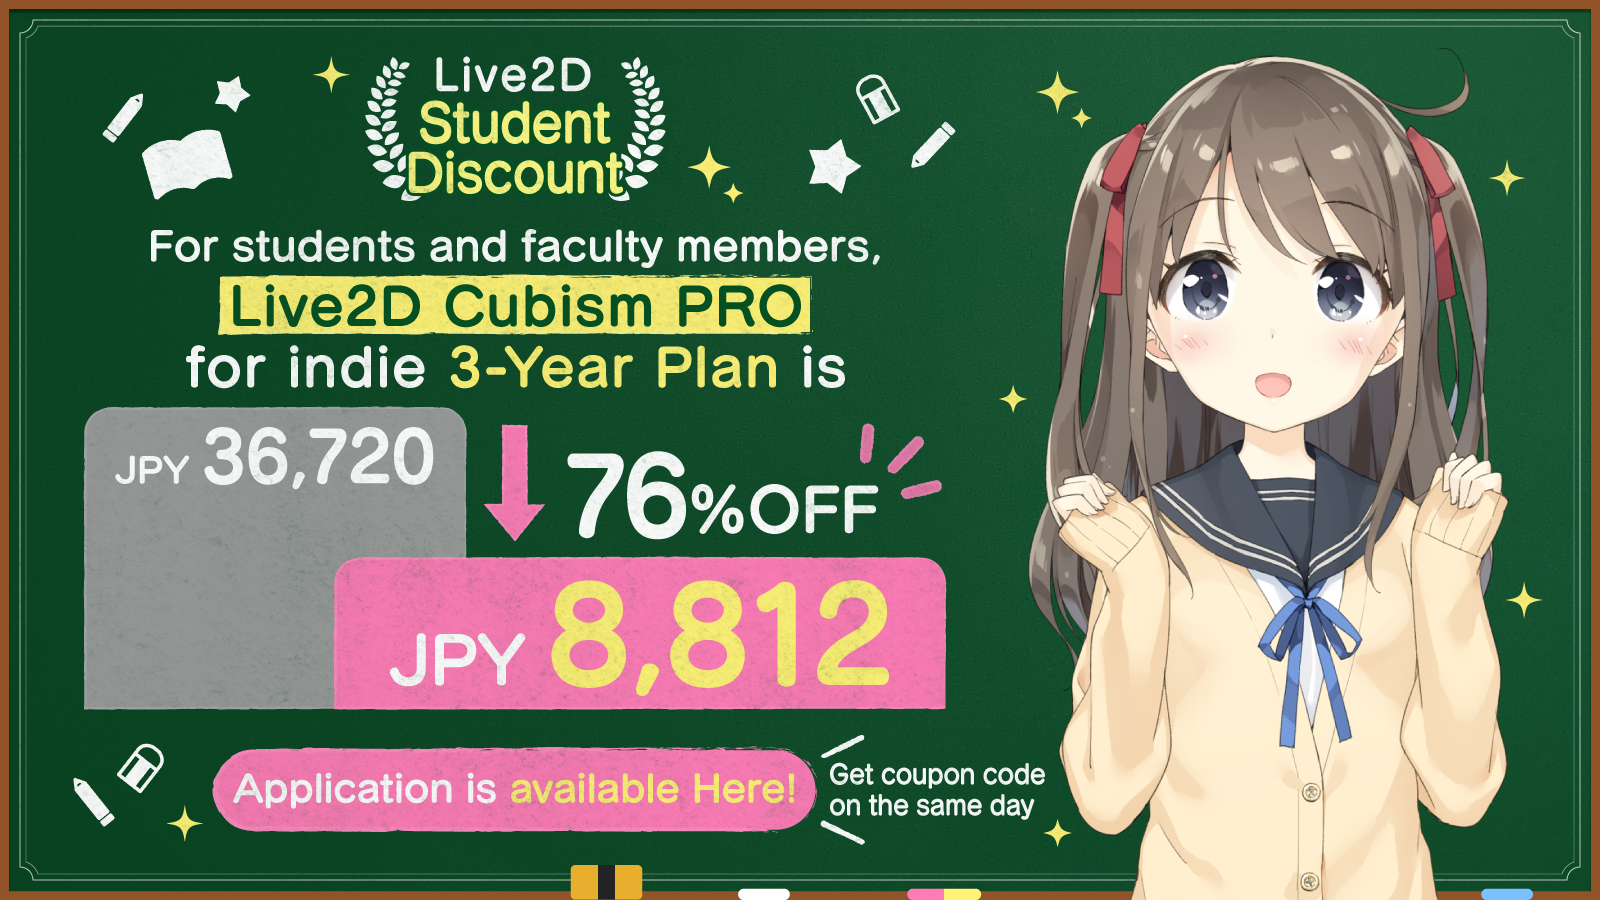 Availble only for Live2D Cubism PRO for indie 3-Year Plane